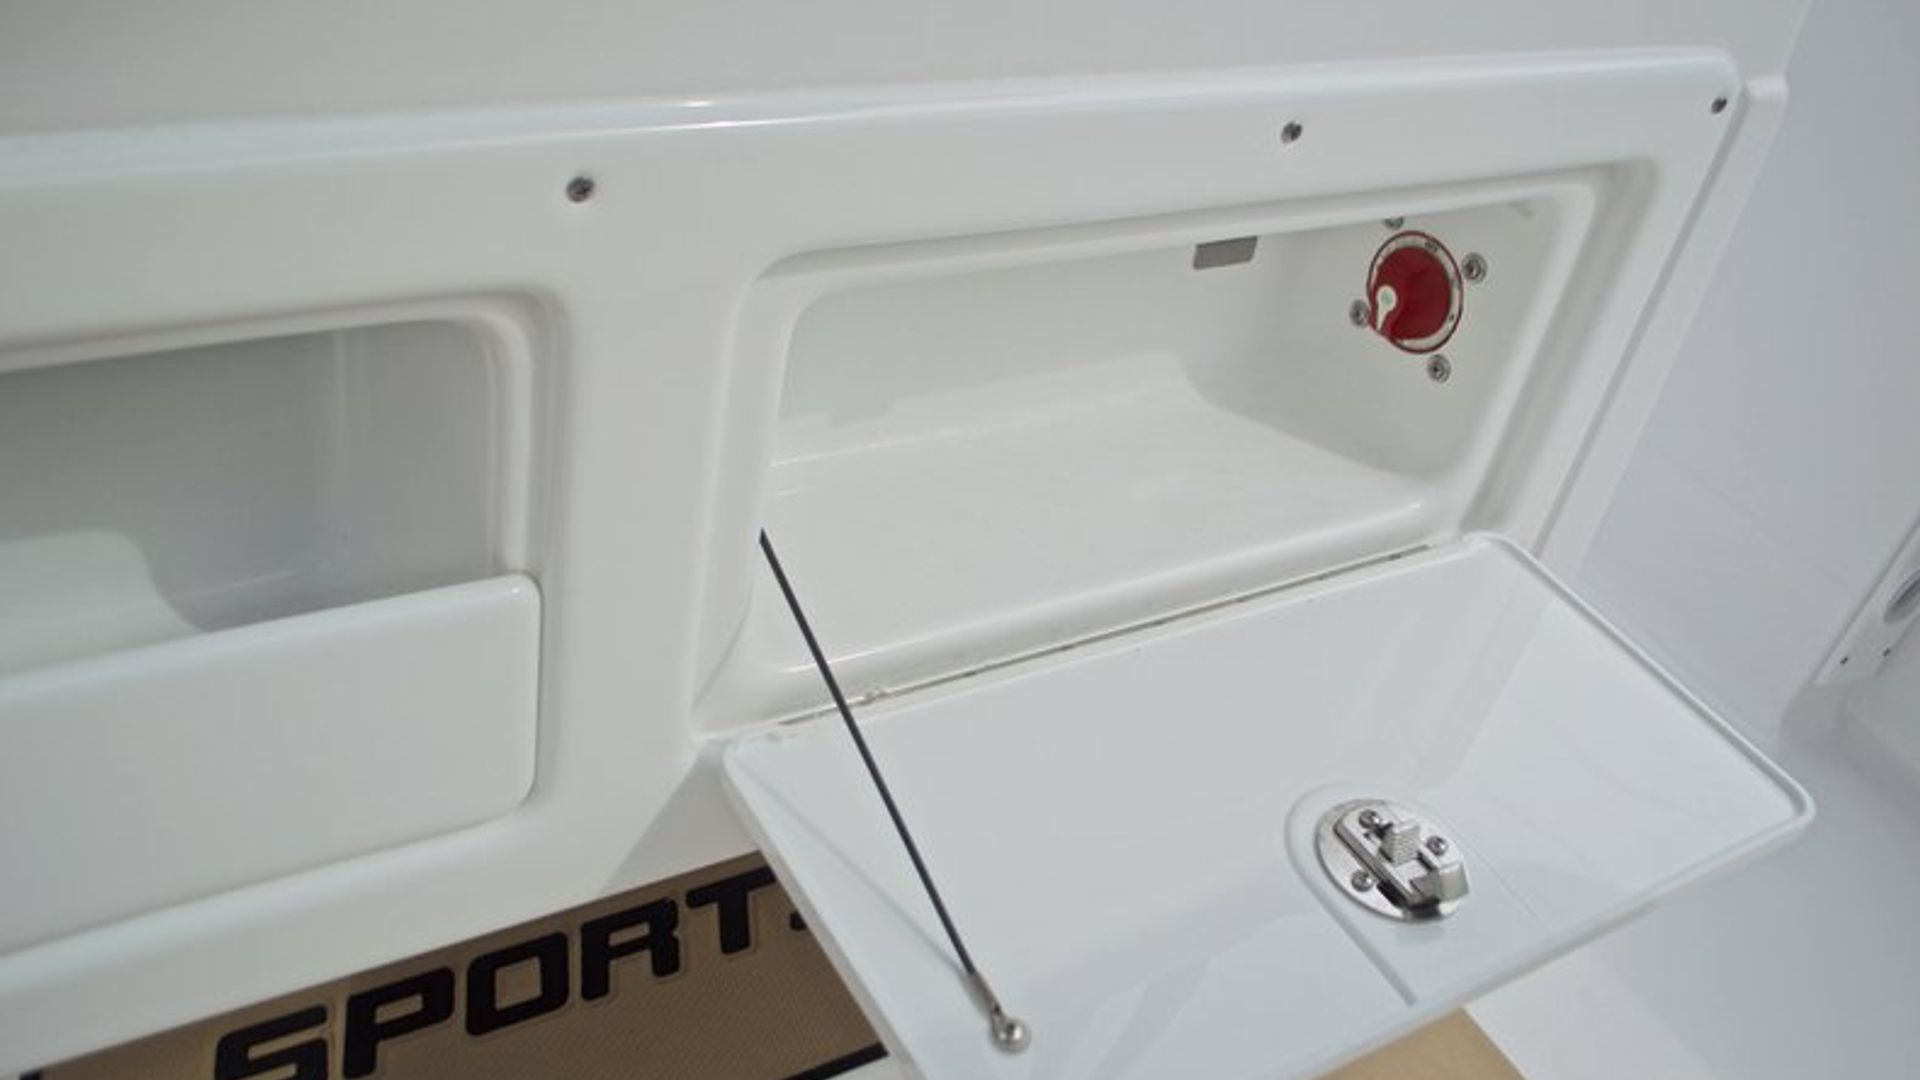 New 2017 Sportsman Heritage 211 Center Console #H577 image 36